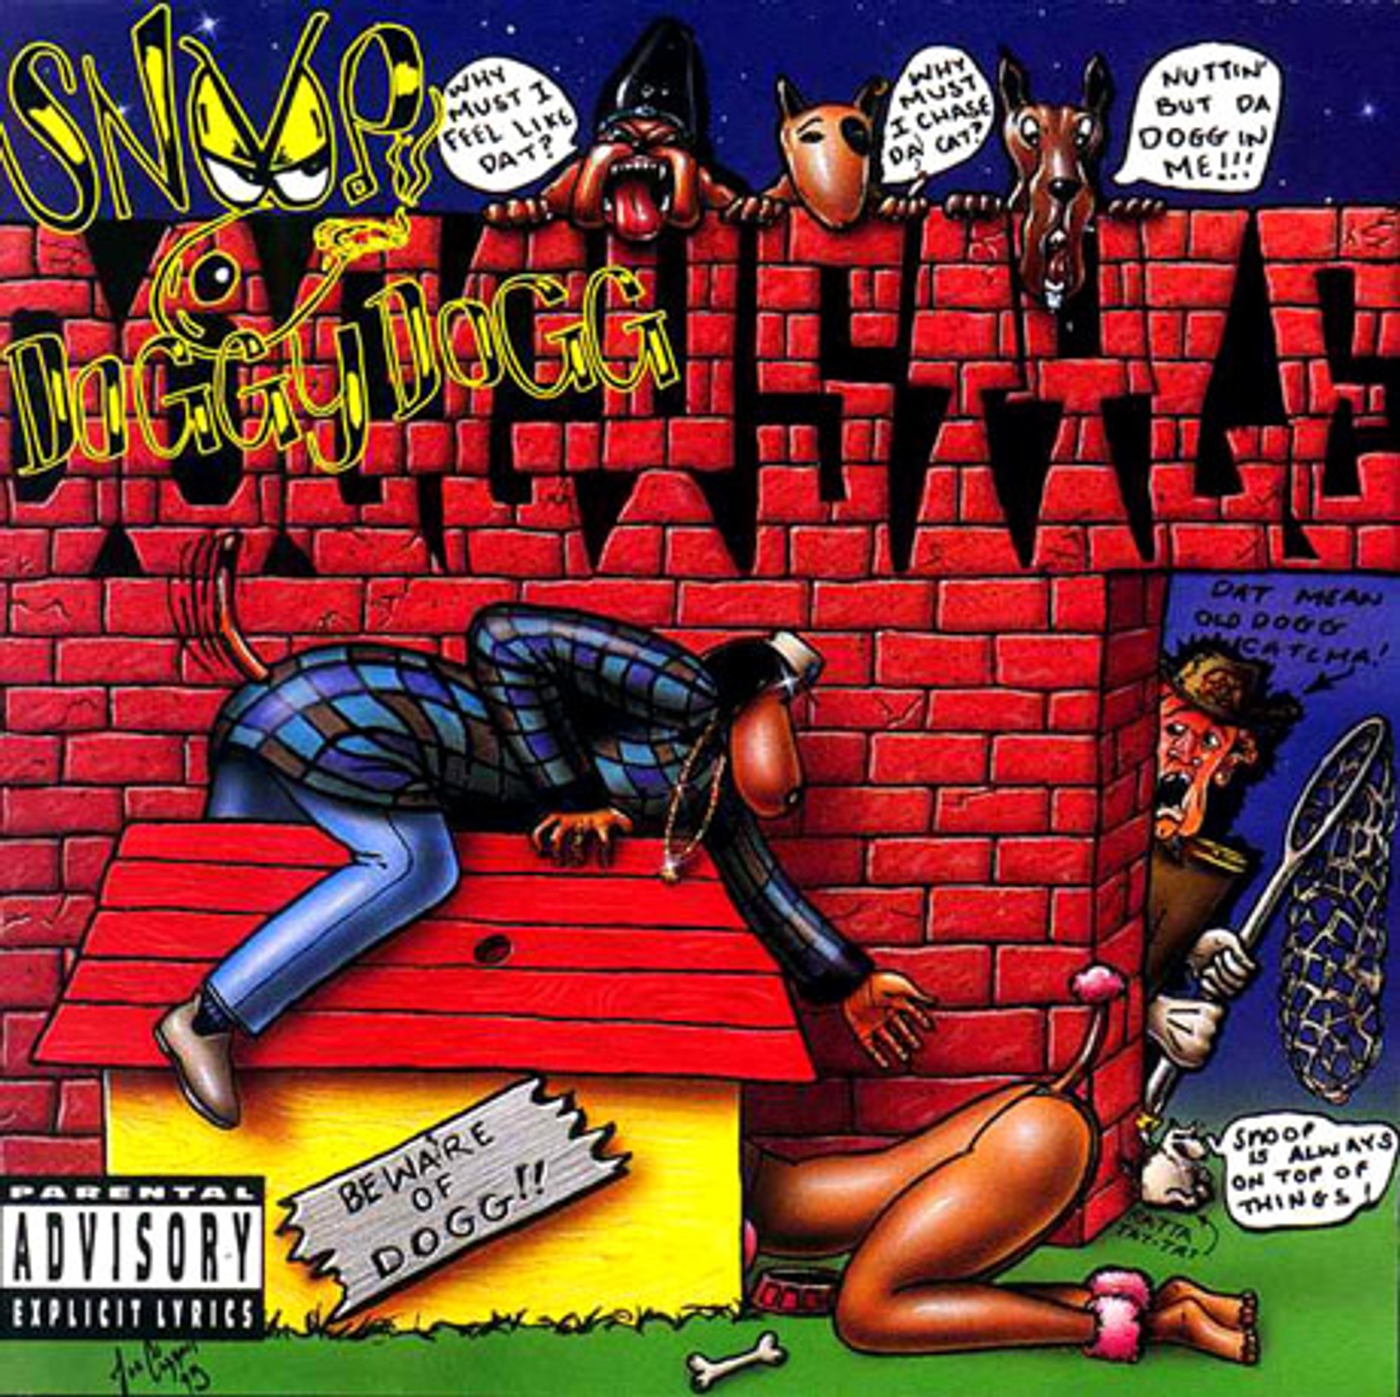 Snoop Doggy Dogg:<a href="http://en.wikipedia.org/wiki/Doggystyle" target="new" style="text-decoration:underine;">Doggystyle</a> (5/5)